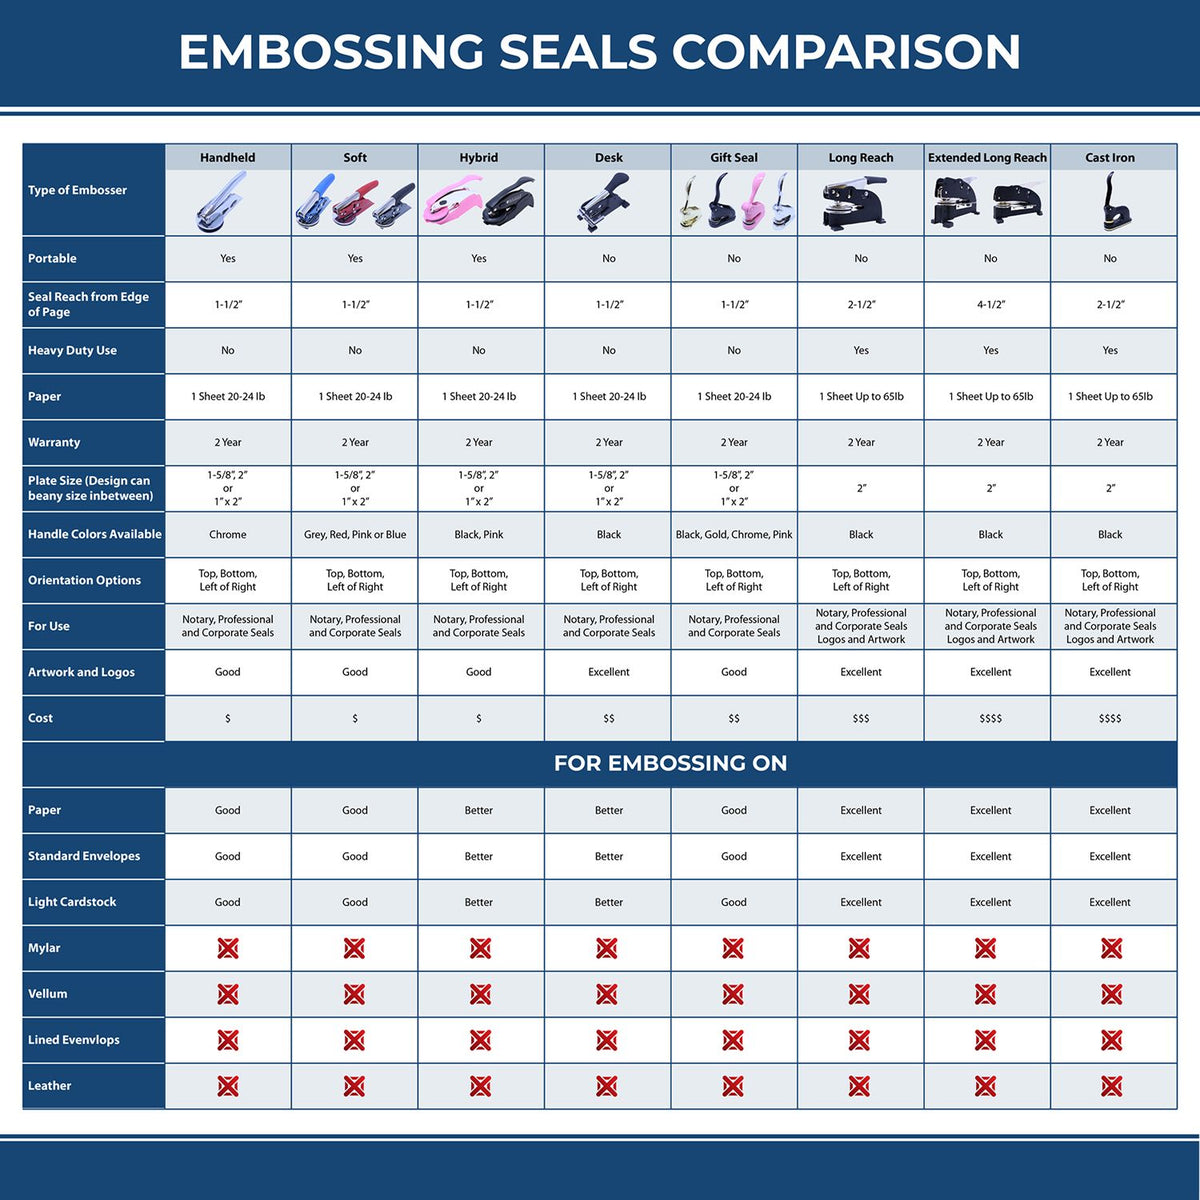 A comparison chart for the different types of mount models available for the Heavy Duty Cast Iron Guam Engineer Seal Embosser.